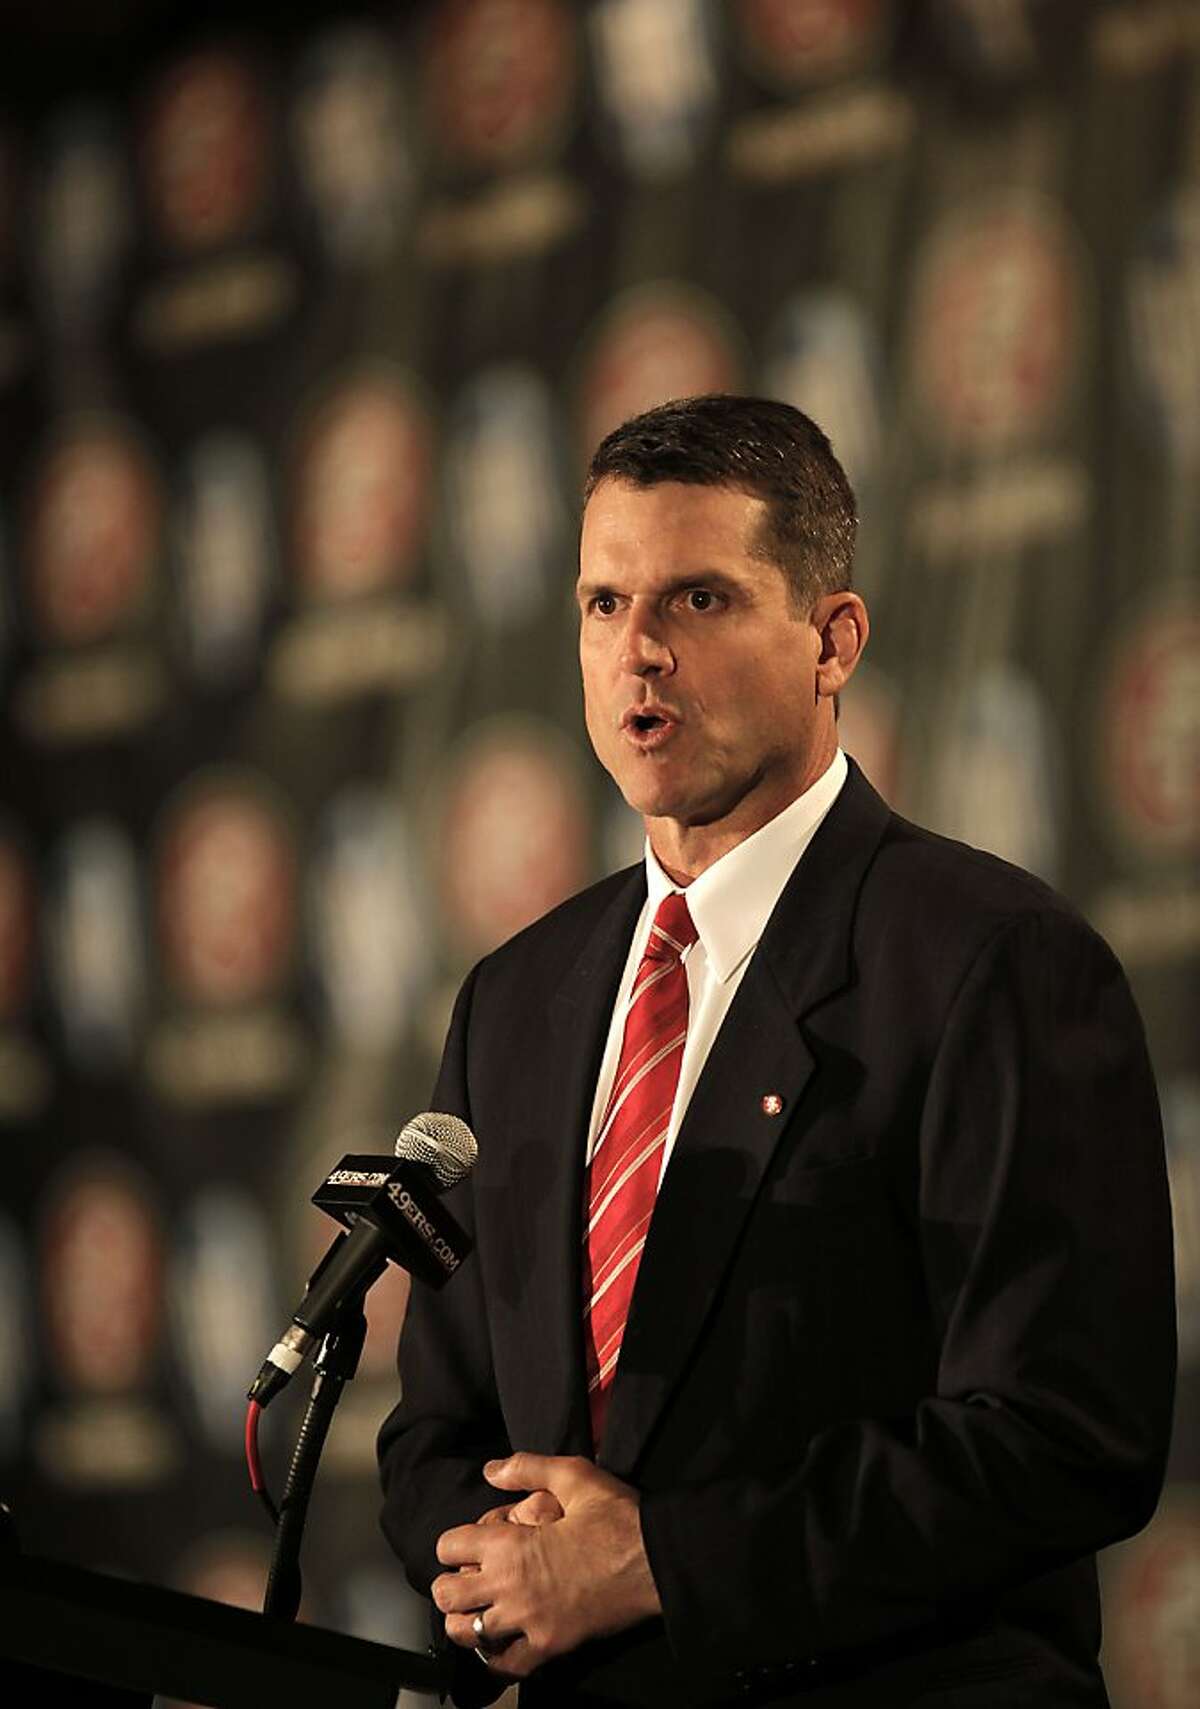 The San Francisco 49ers introduce their new head coach, Jim Harbaugh, at a news conference in San Francisco on Friday.